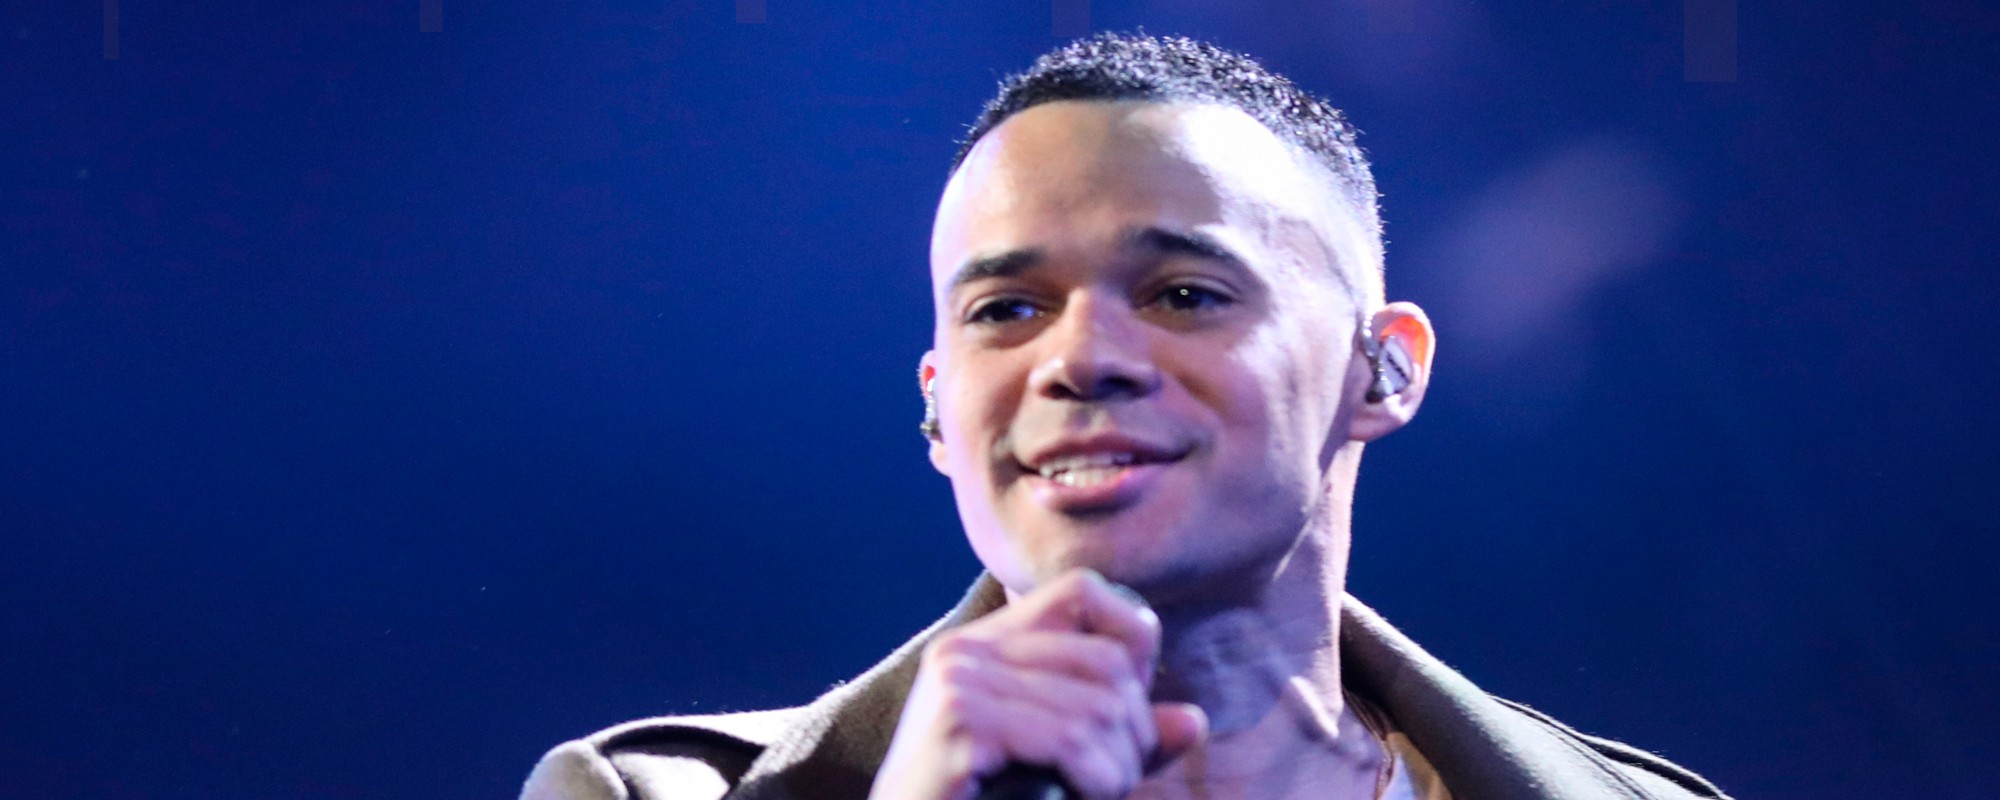 Tauren Wells to Perform the National Anthem in Detroit on Thanksgiving Day